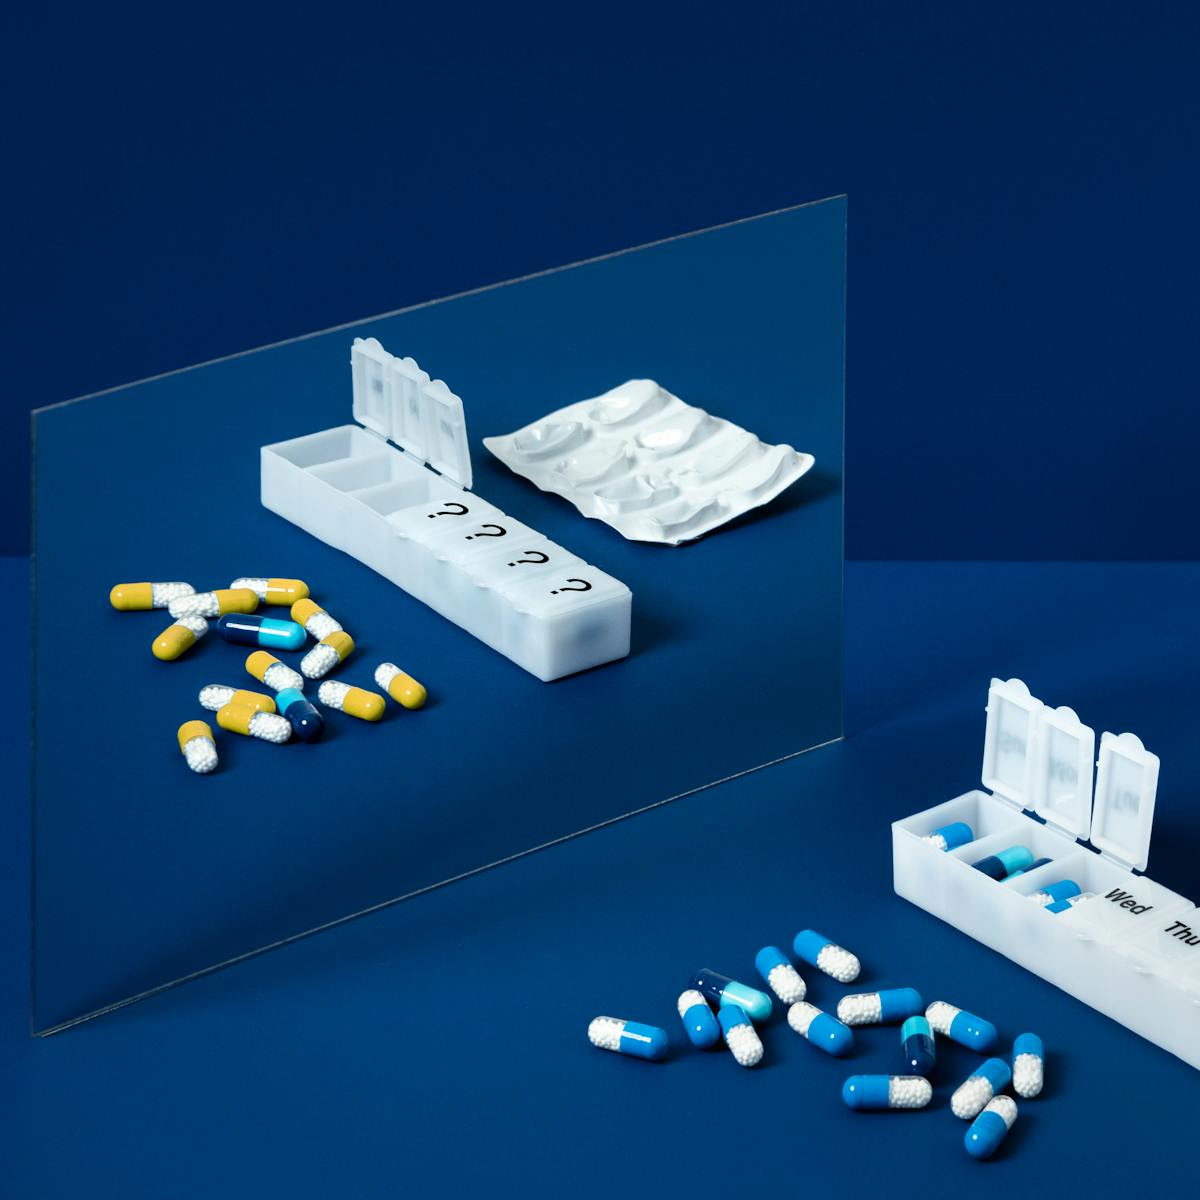 A photograph of a mirror on a blue background. In the foreground is a pill organiser, labelled with the days of the week, and loose blue and white pills. In the reflection of the mirror the pills are yellow.